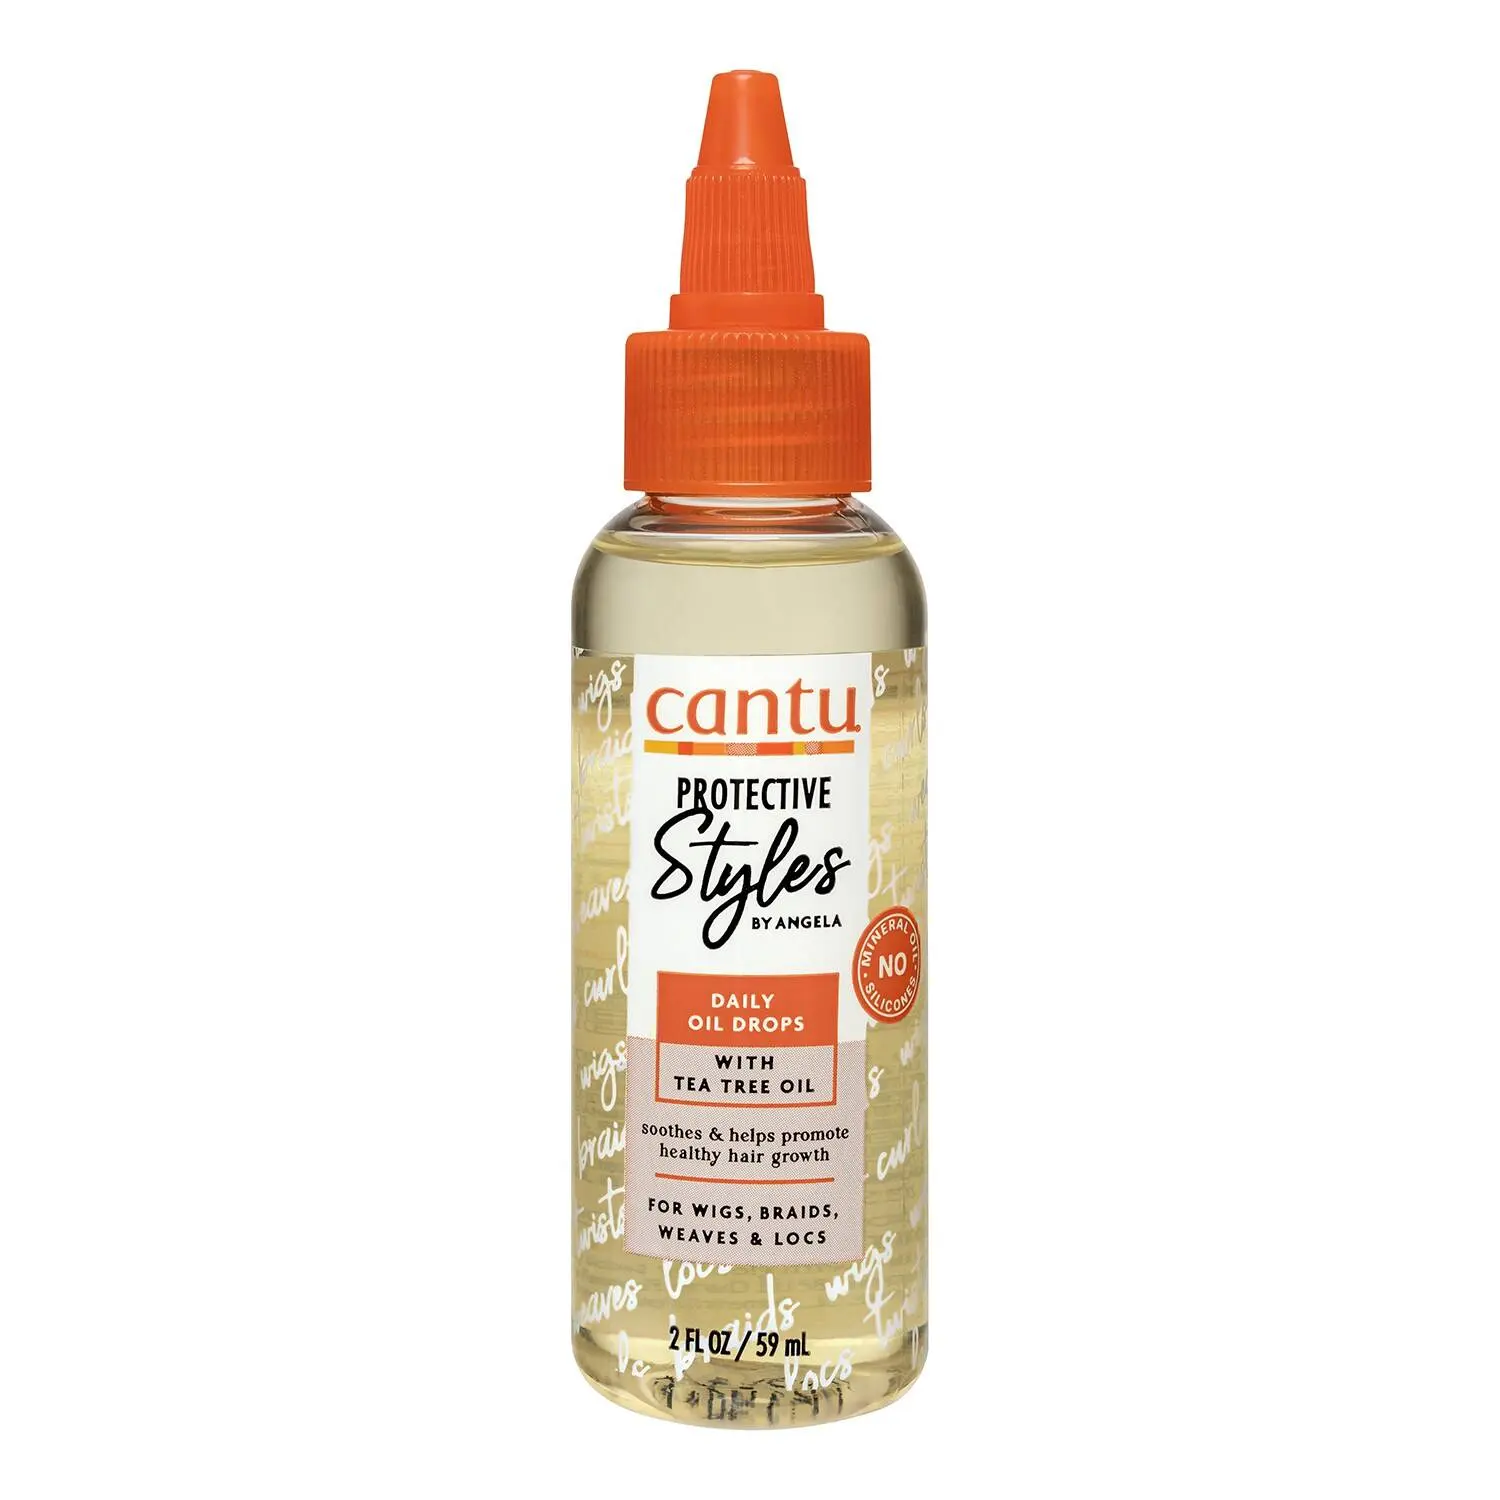 CANTU Protective Styles Daily Oil Drops with Tea Tree Oil 59ml Discounts and Cashback